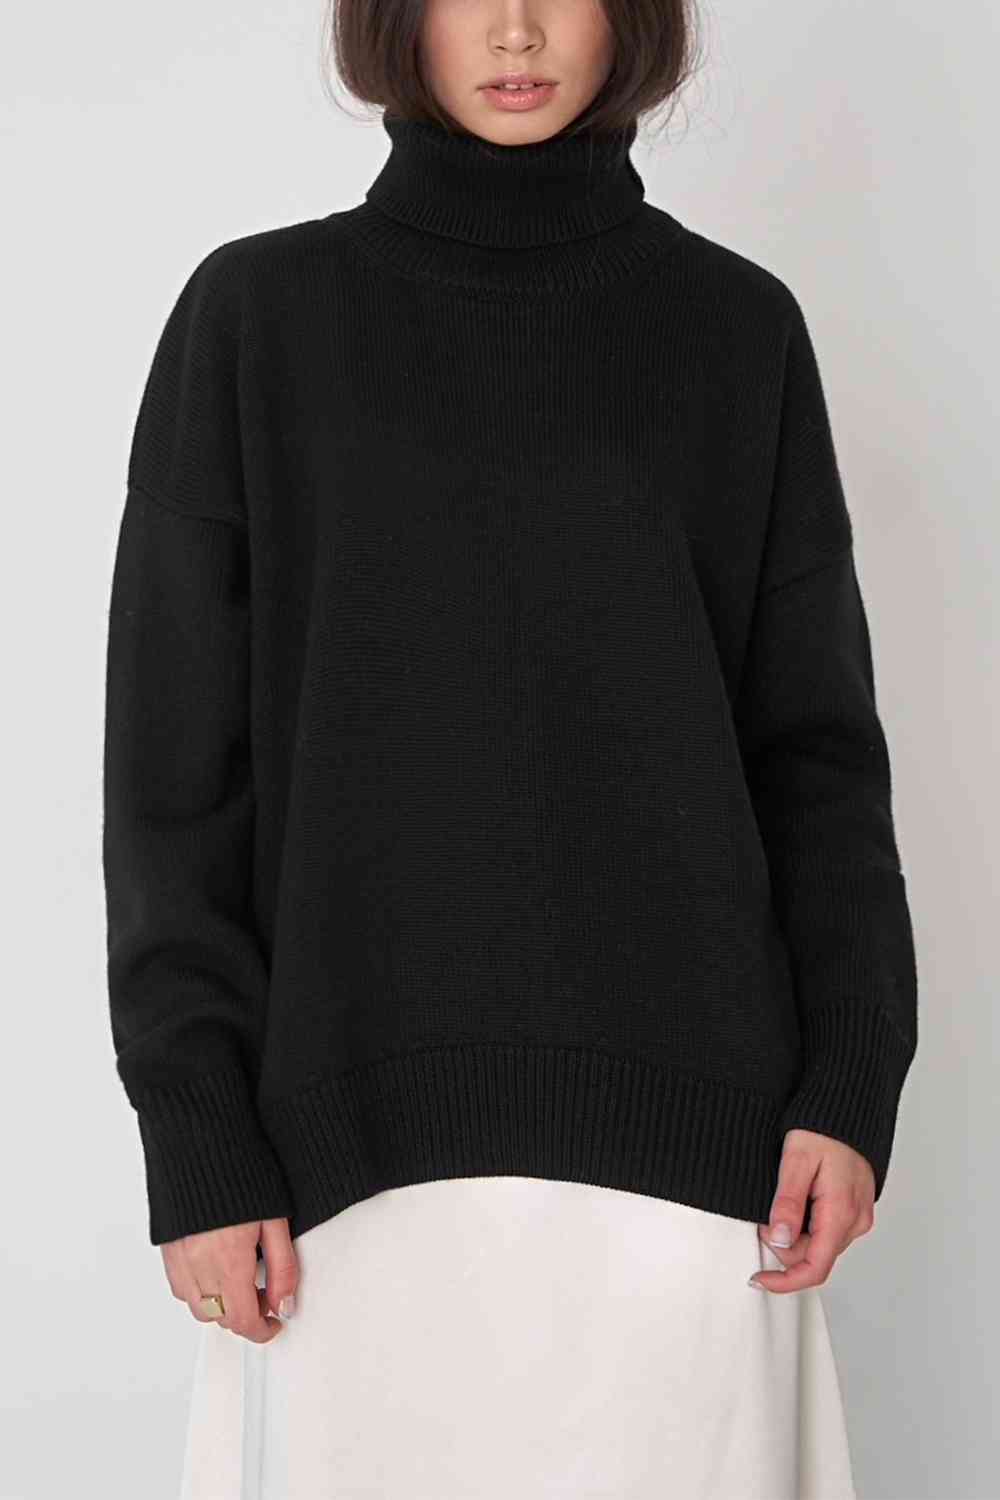 7 Cozy Turtle Neck Dropped Shoulder Sweaters